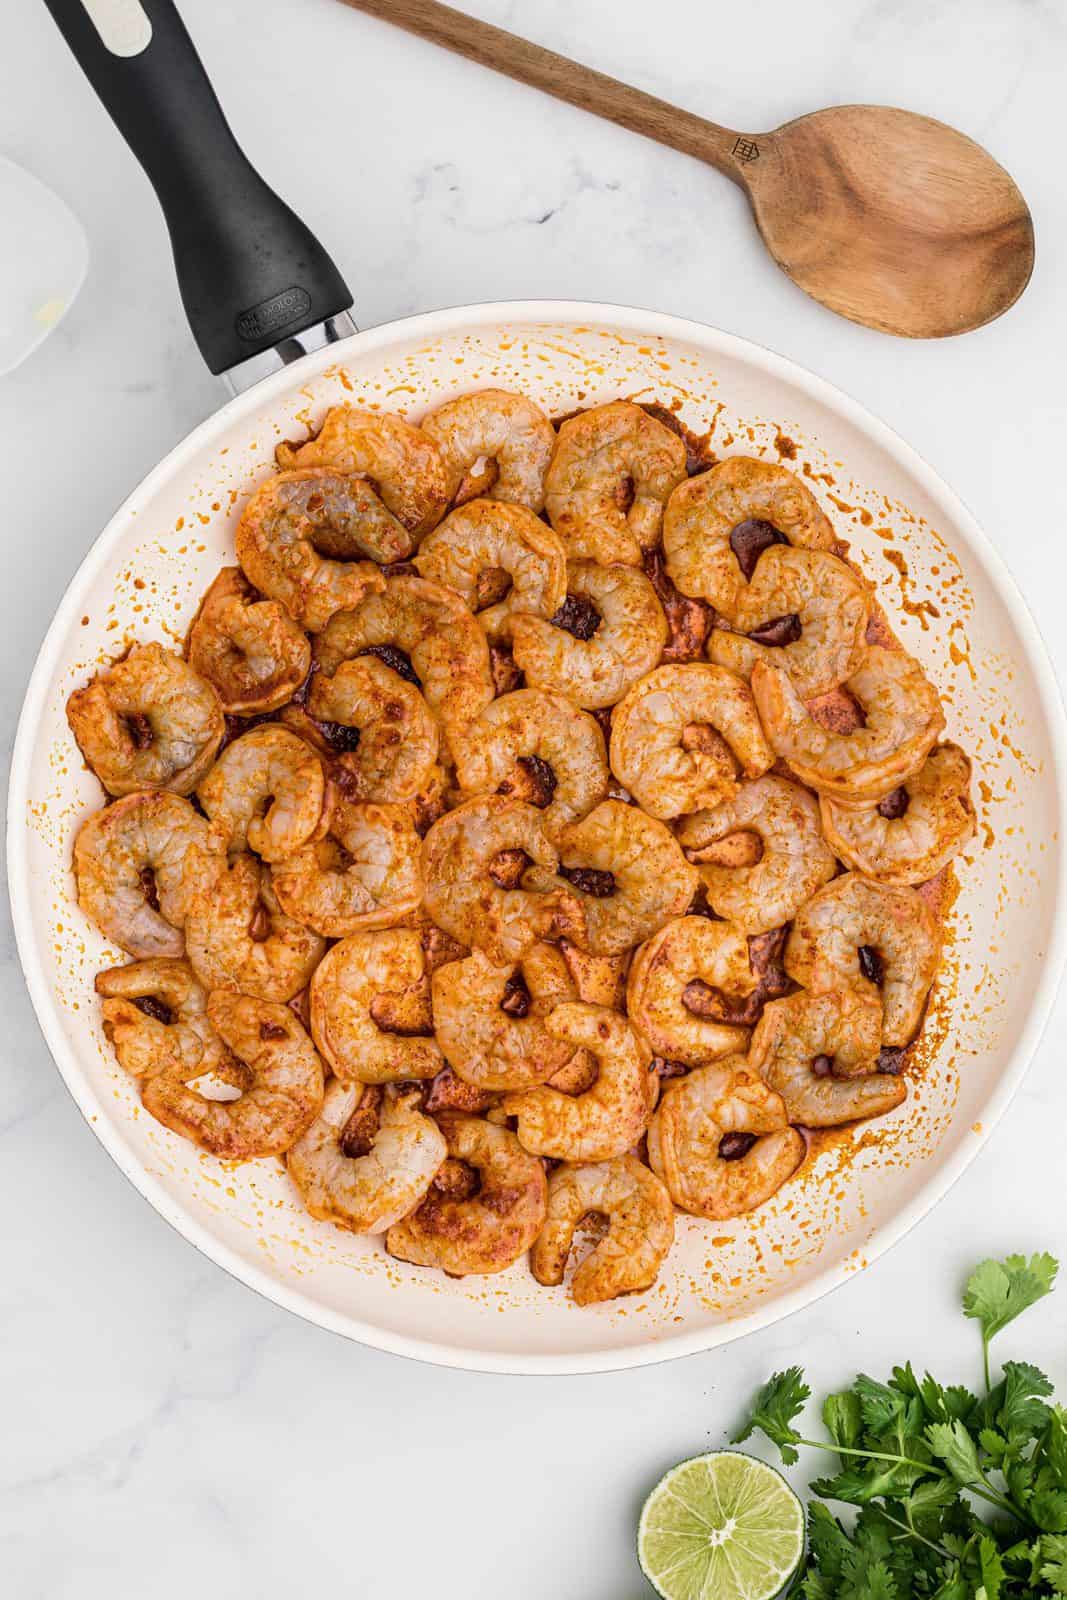 Coated shrimp added to pan.